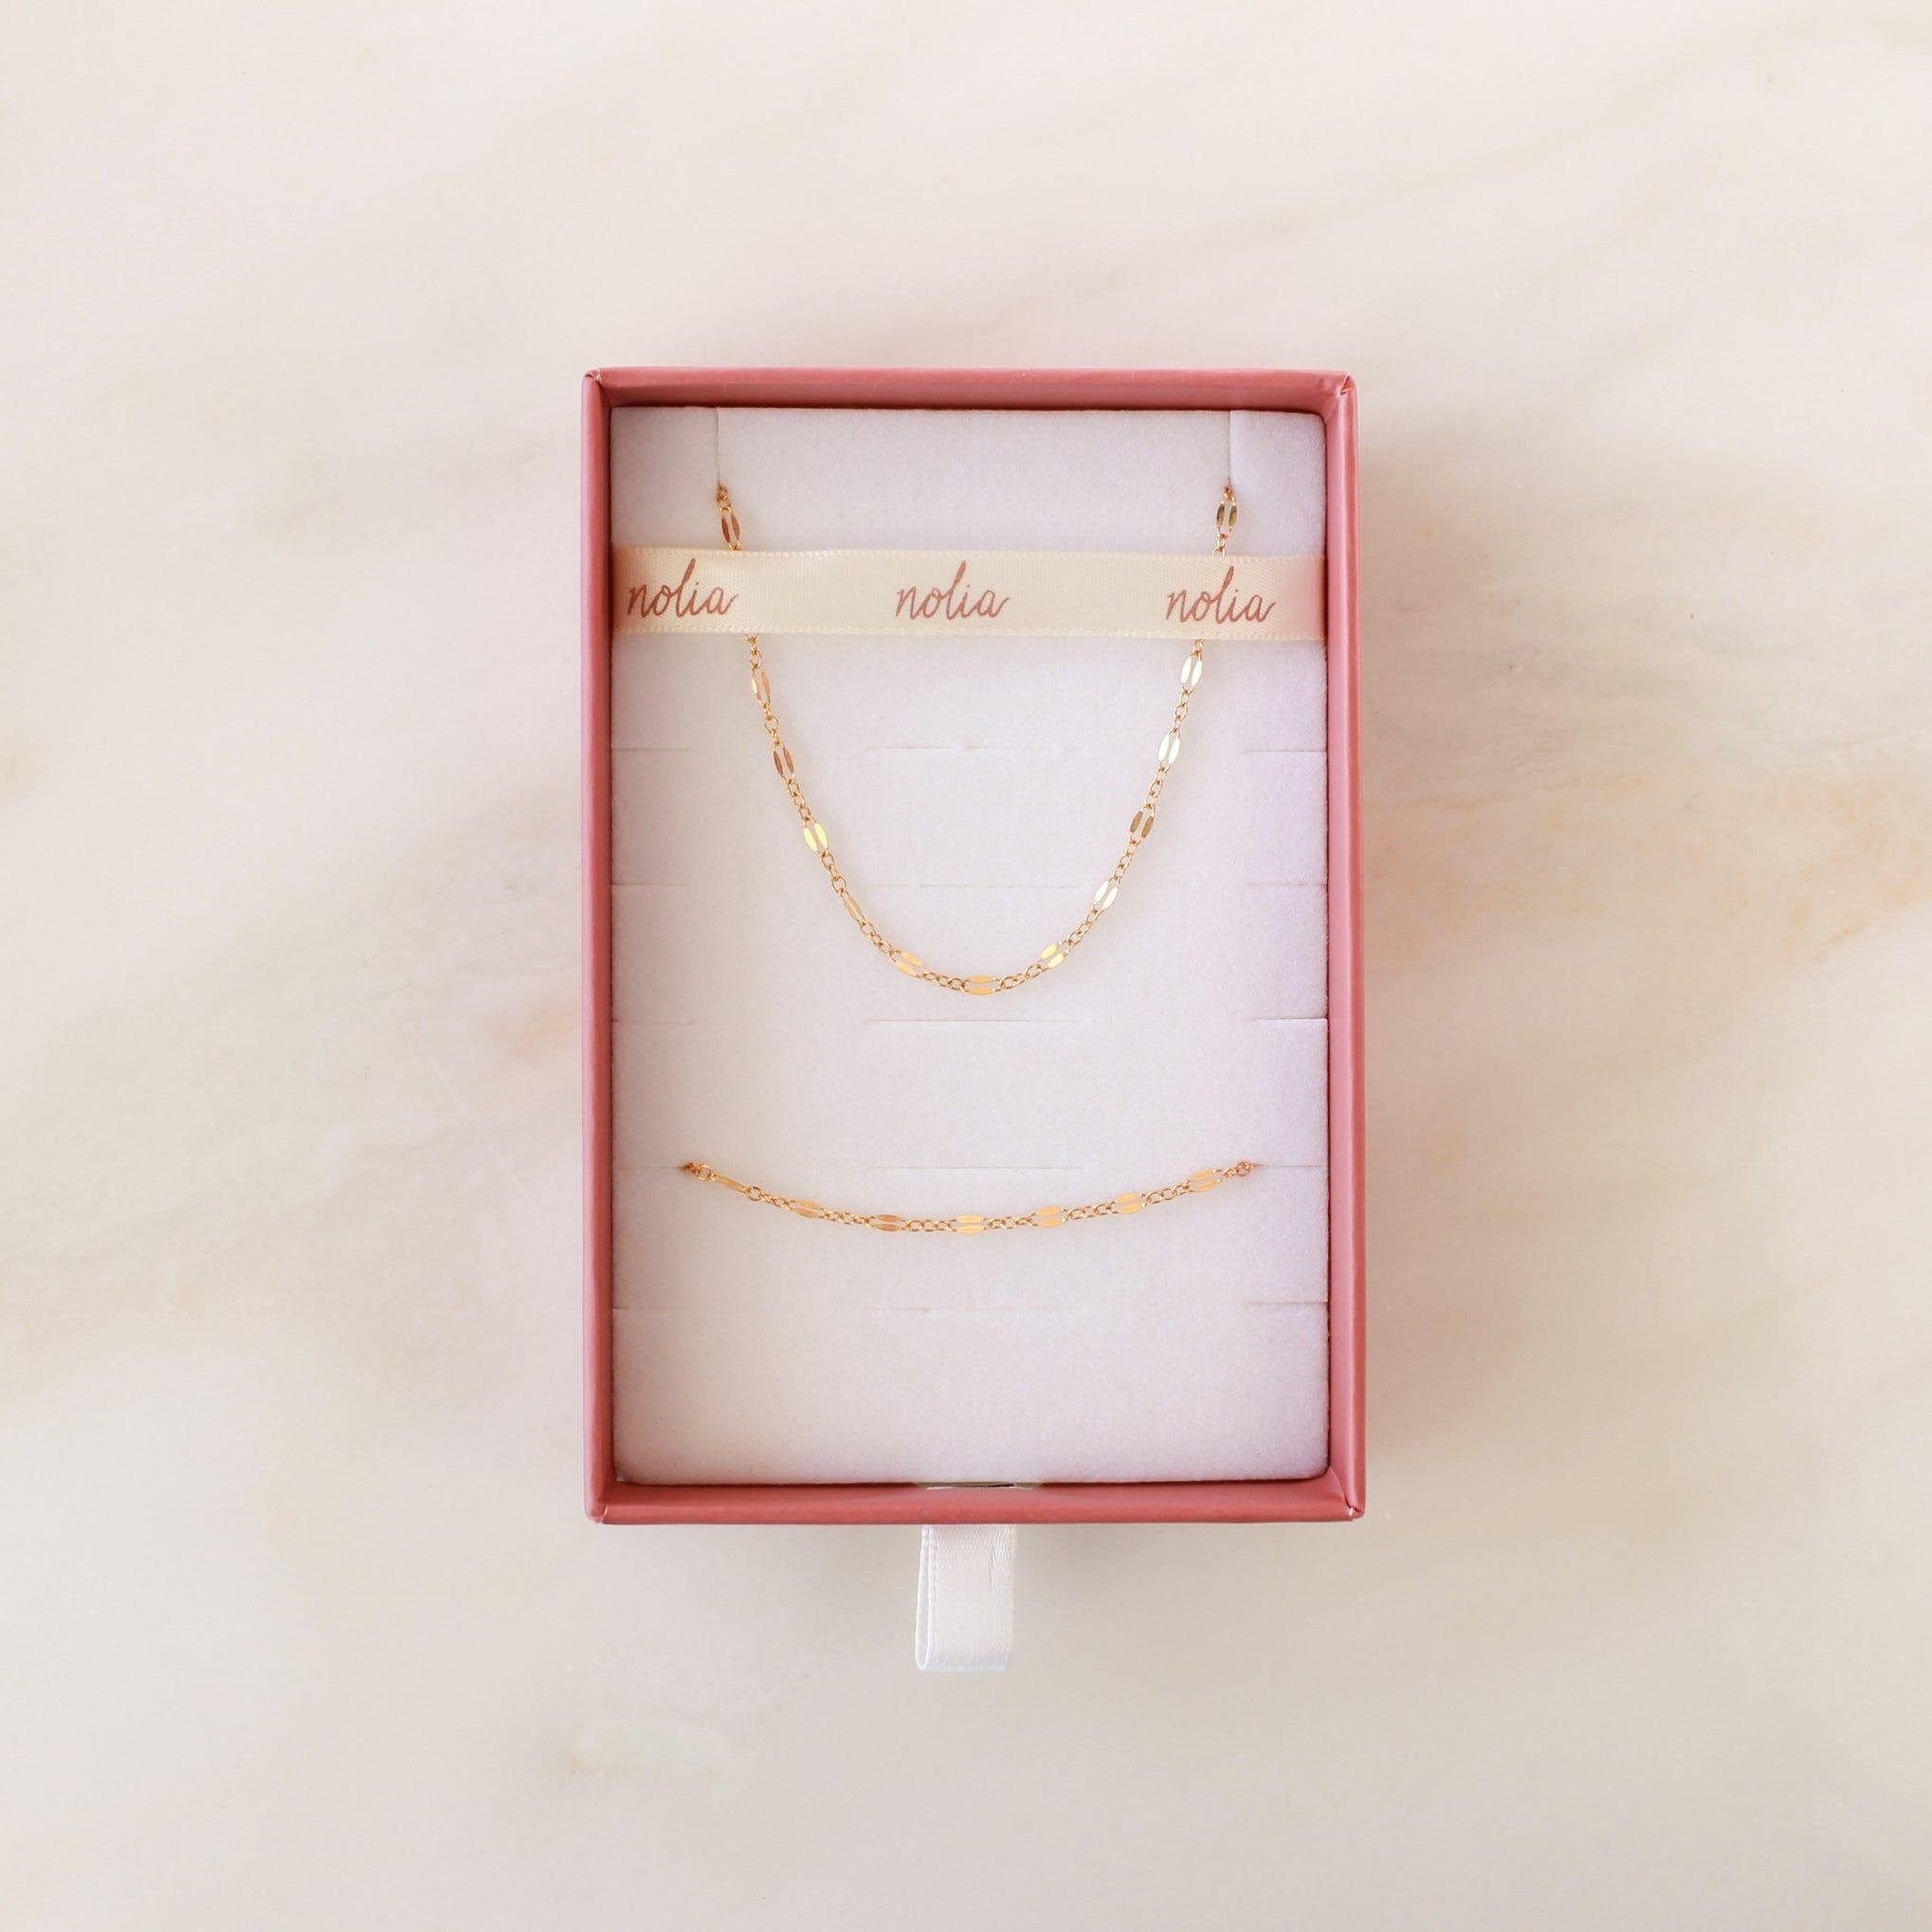 Lace Chain Gift Set - Nolia Jewelry - Meaningful + Sustainably Handcrafted Jewelry